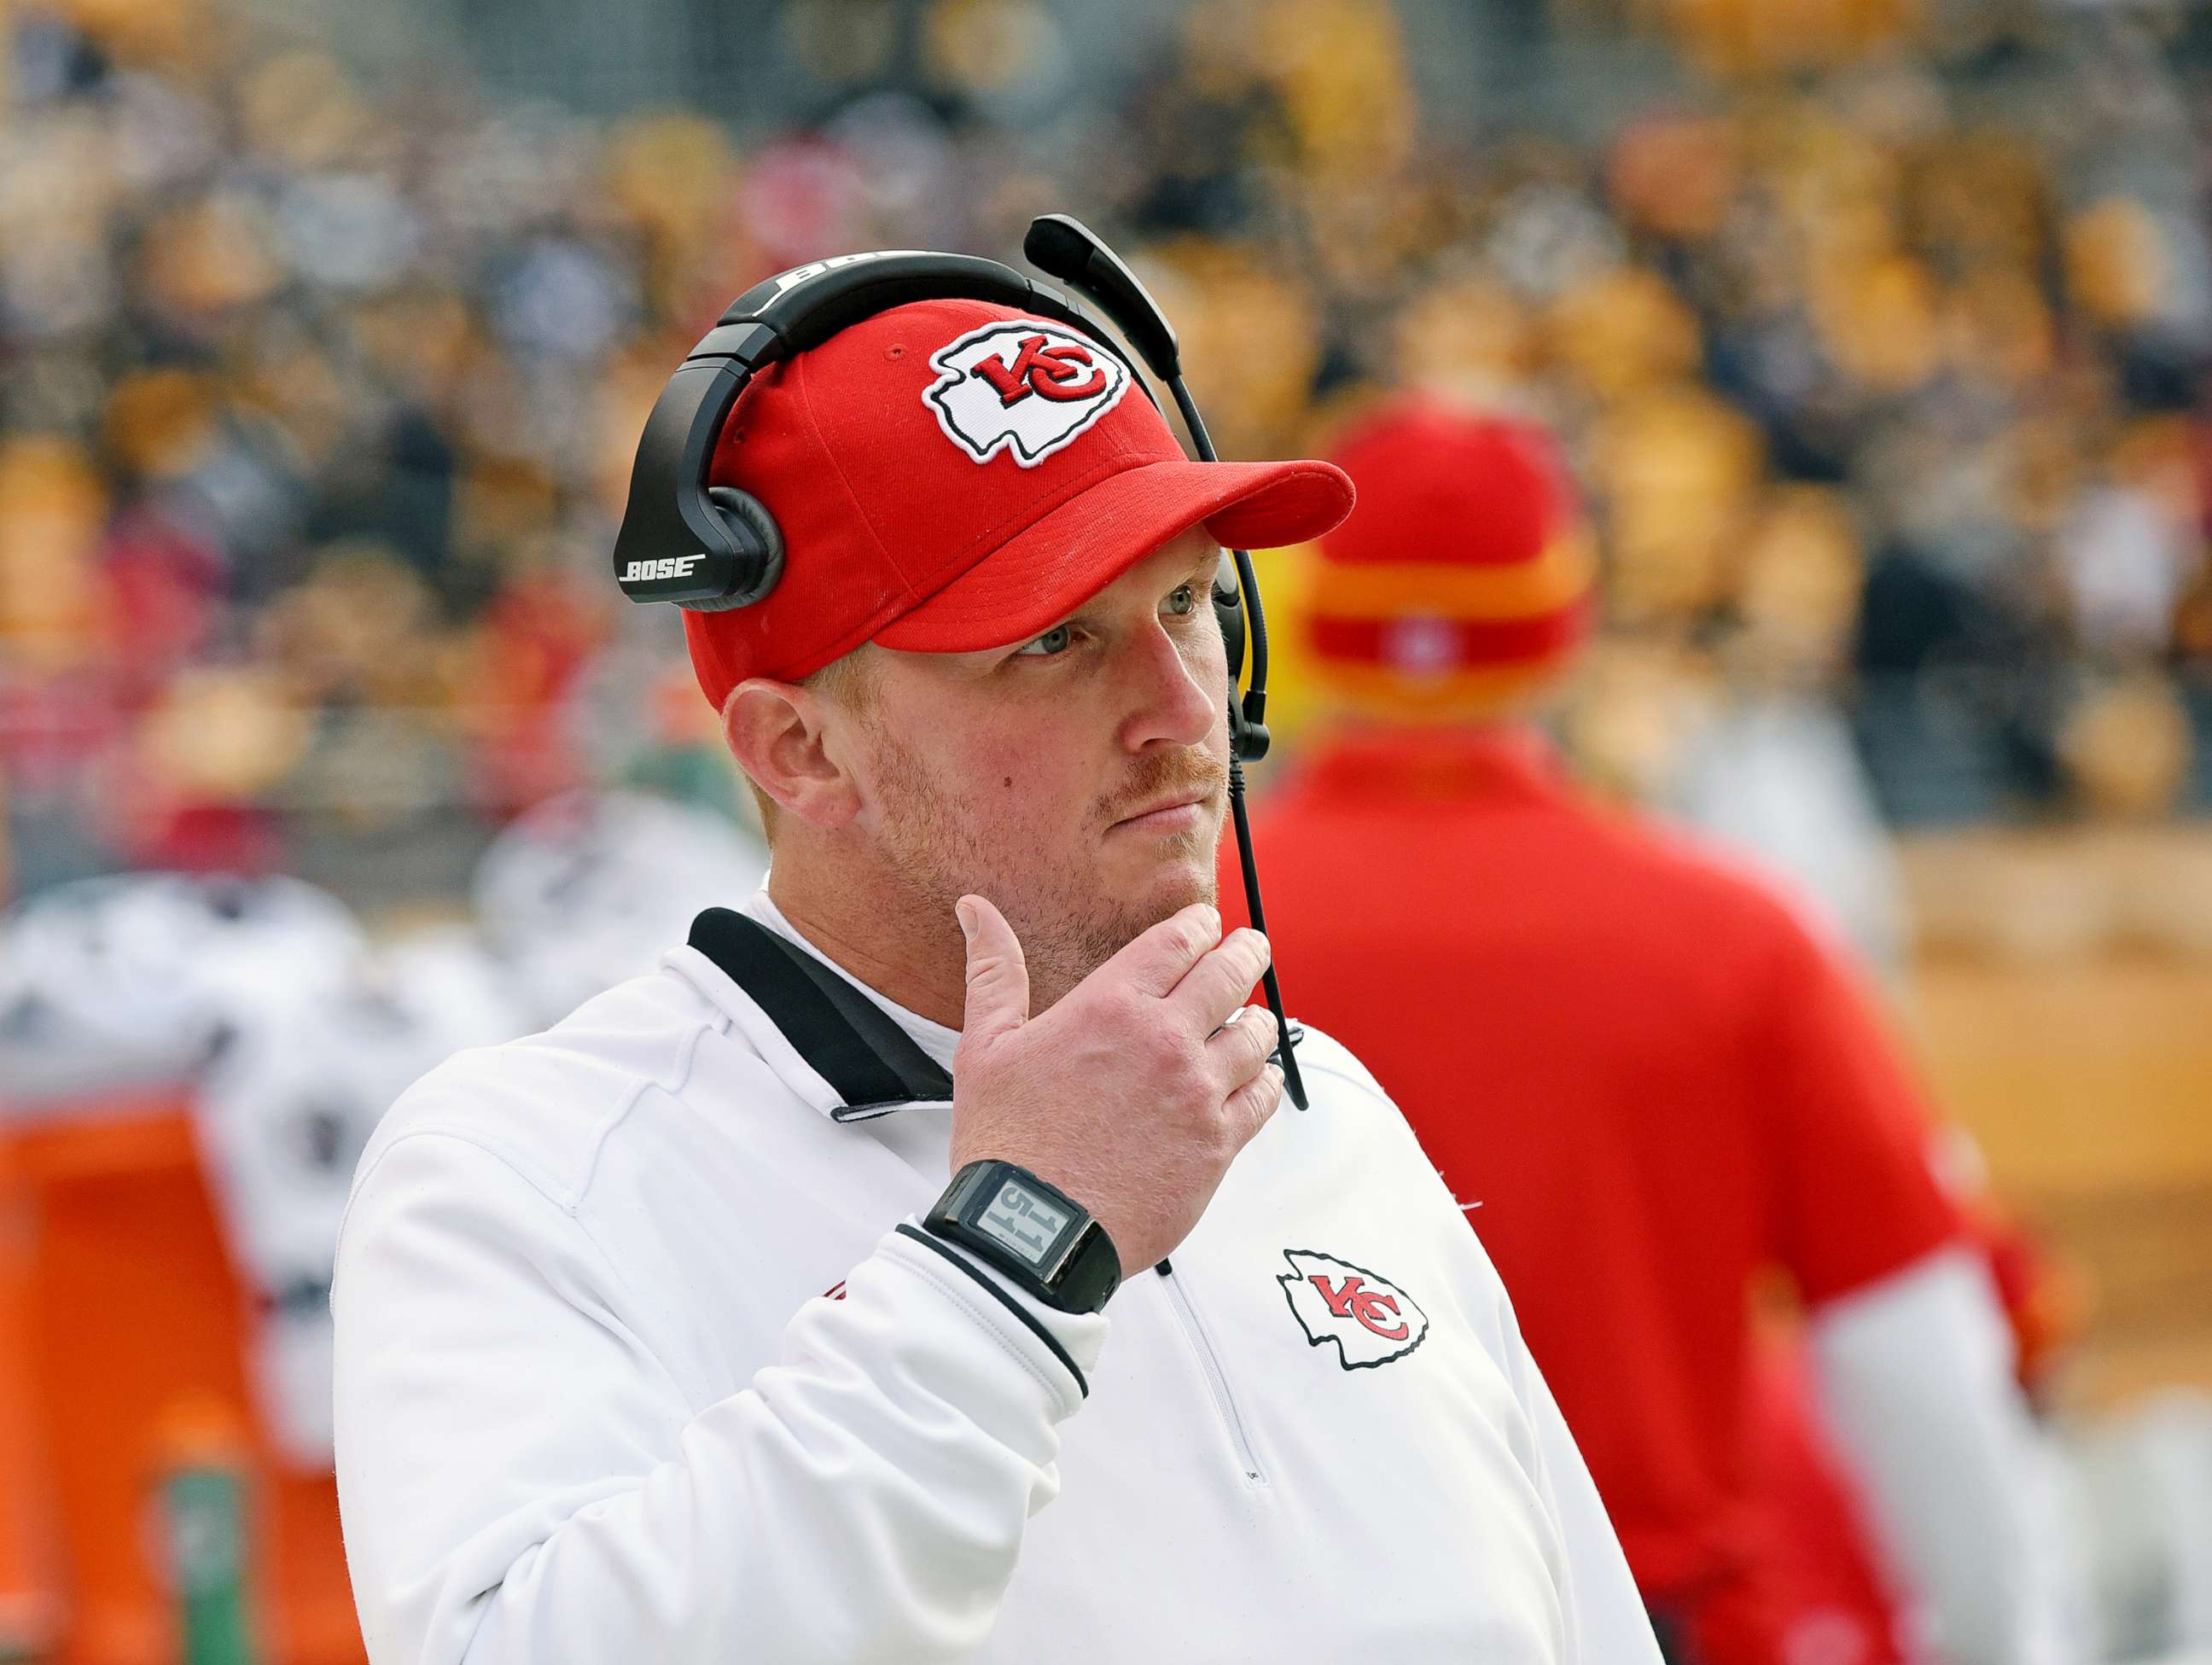 PHOTO: Quality control coach Britt Reid of the Kansas City Chiefs looks on from the sideline before a game in Pittsburgh, Dec. 21, 2014.